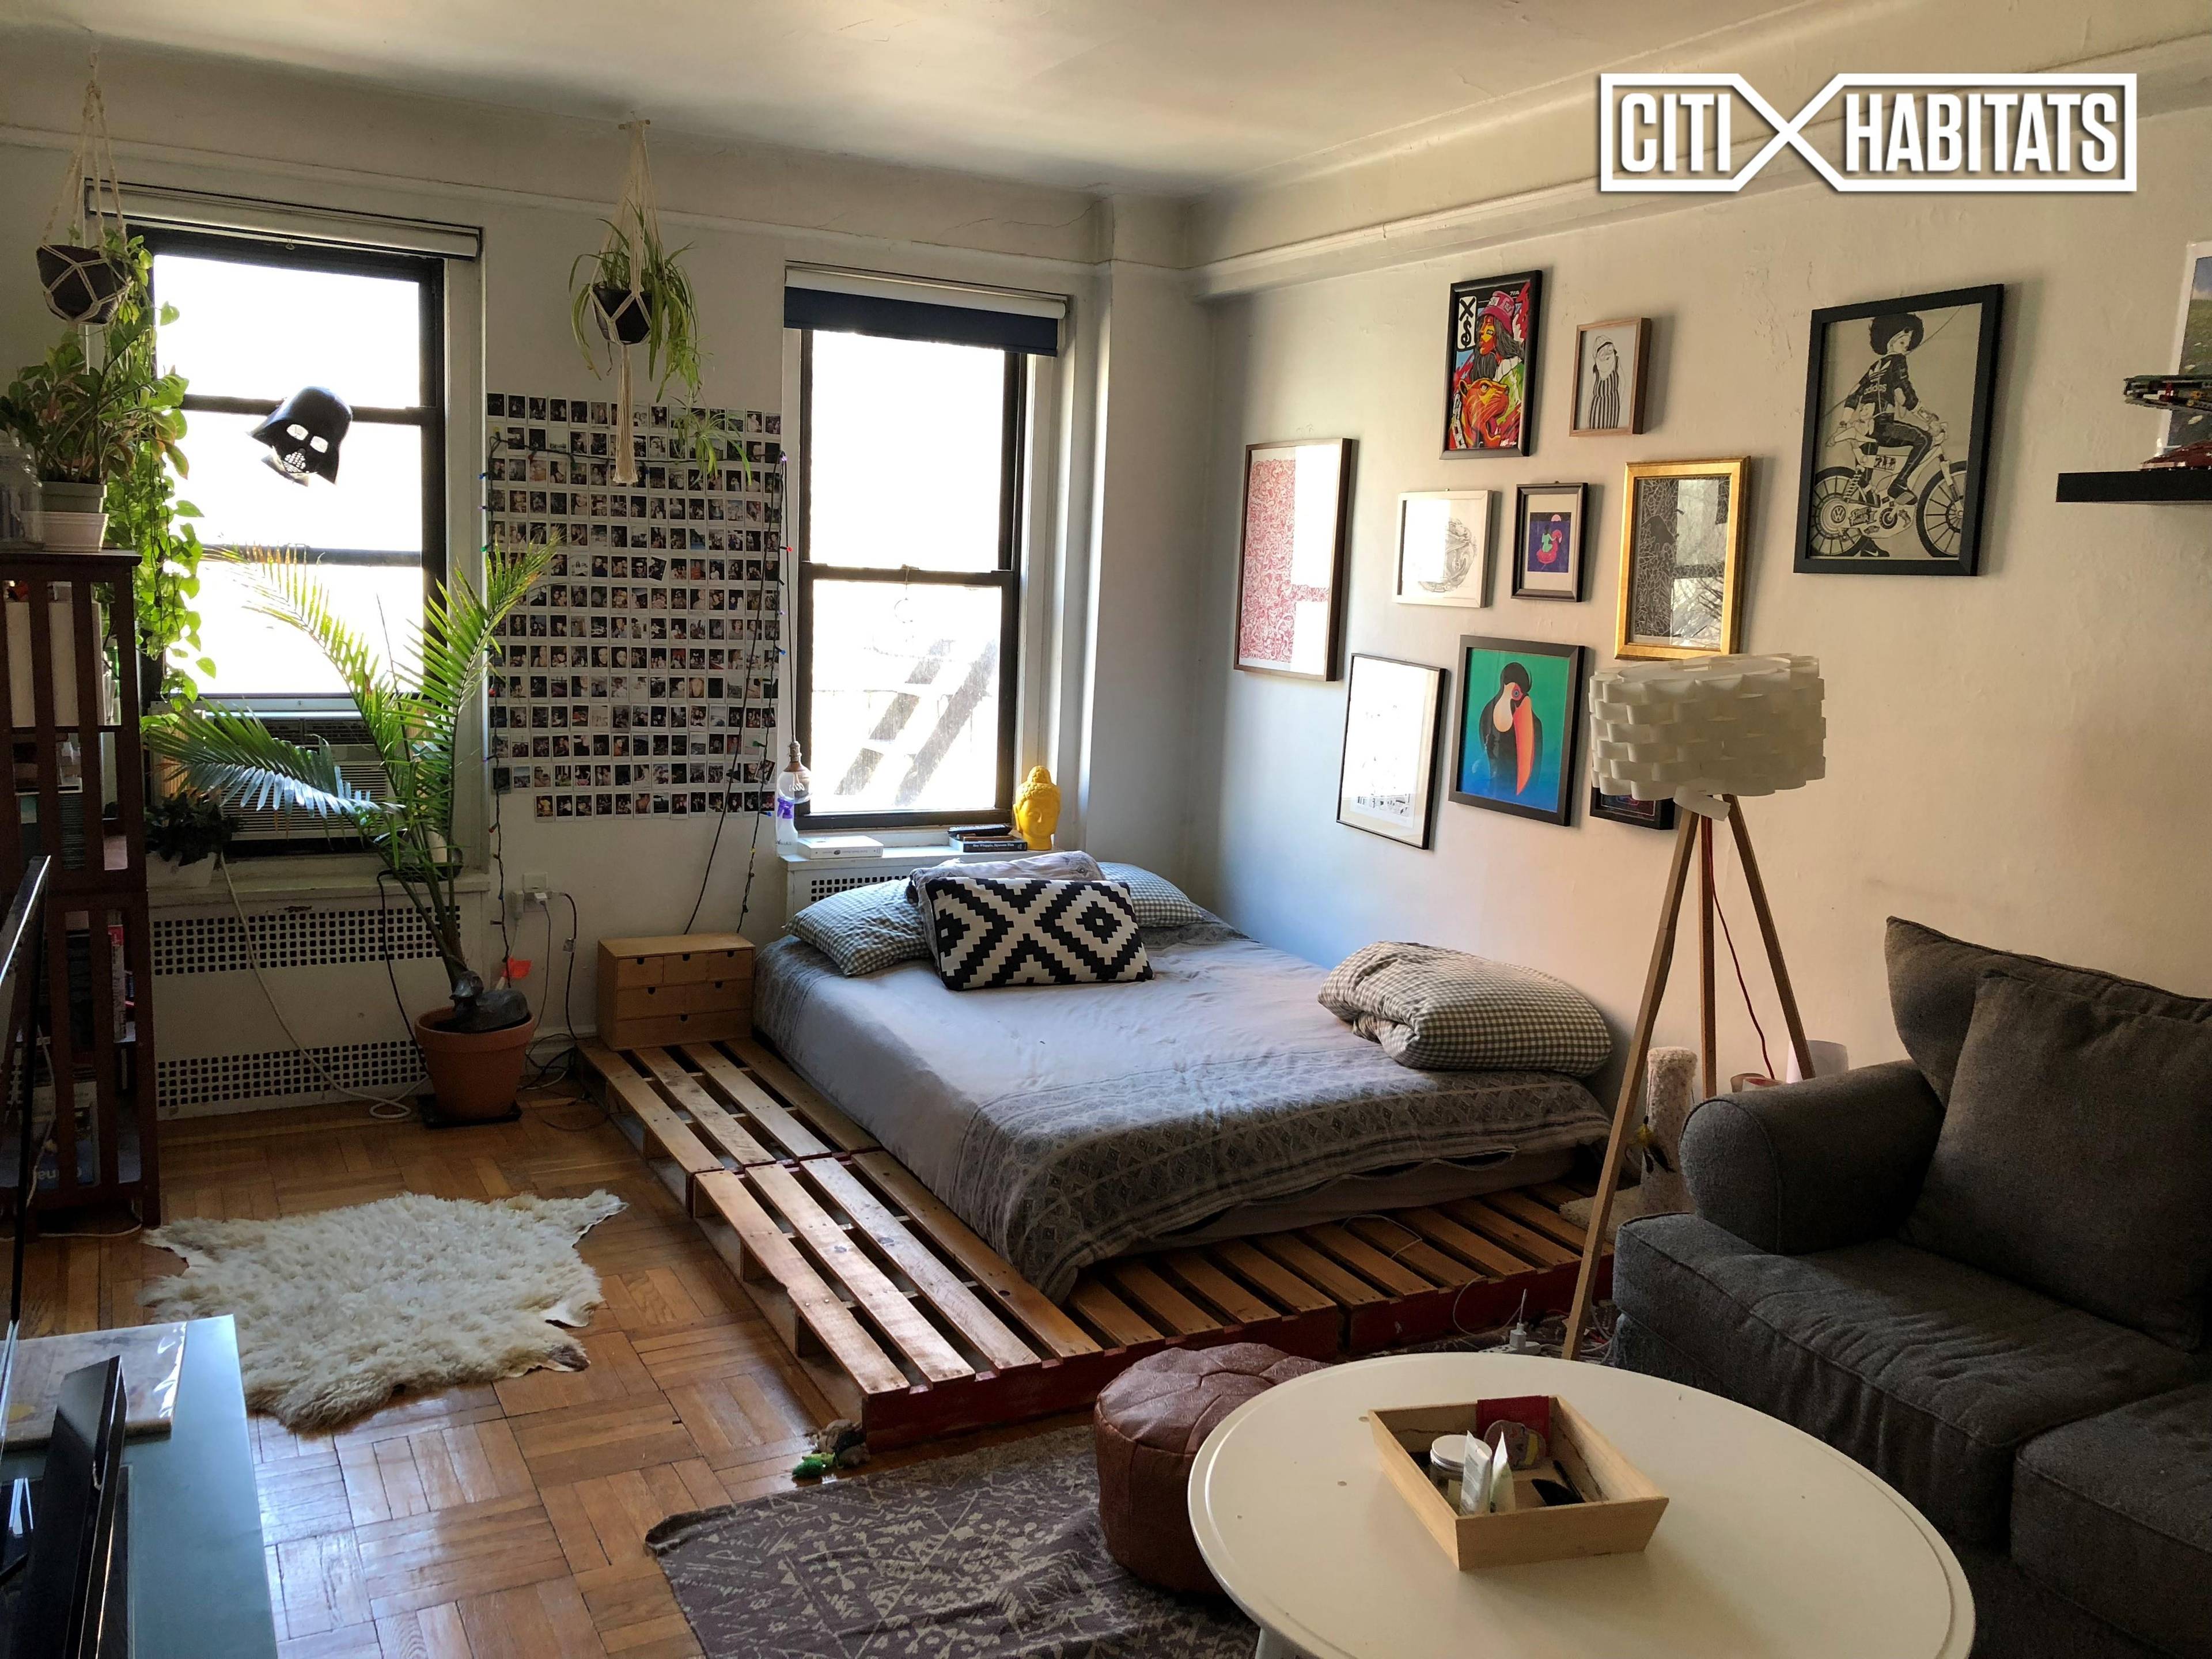 Here's the fantastic, roomy, upgraded Pre War apartment Upper West side home with garden views and a bright, open exposure for which you've been looking.